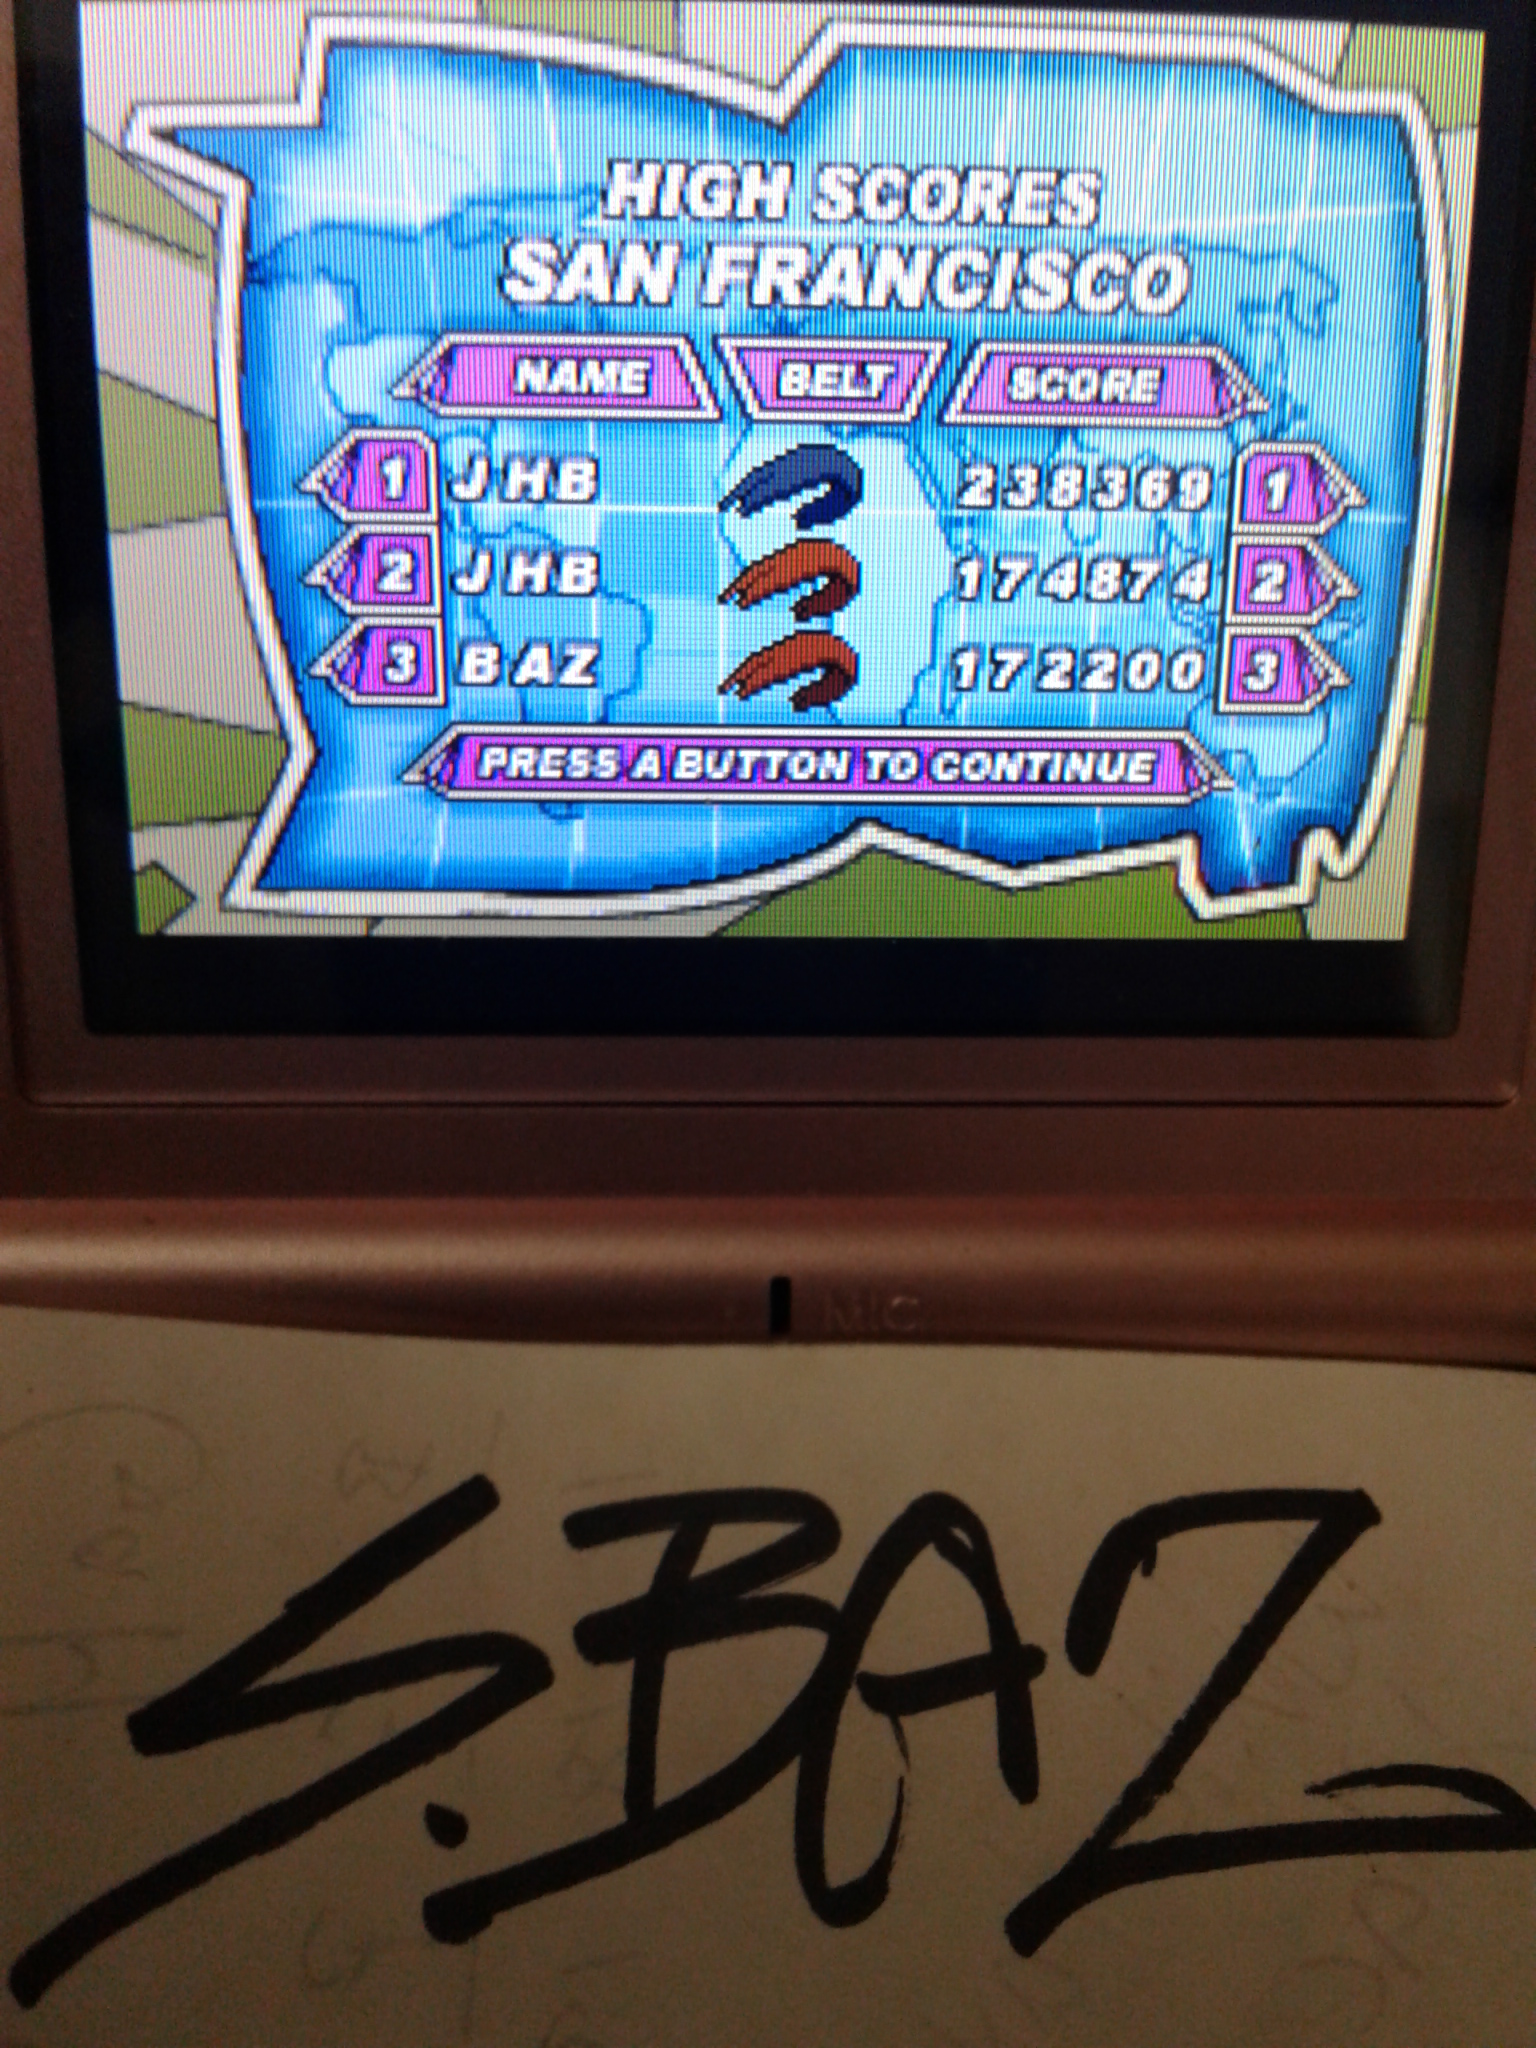 Jackie Chan Adventures: San Francisco [Easy] 172,200 points